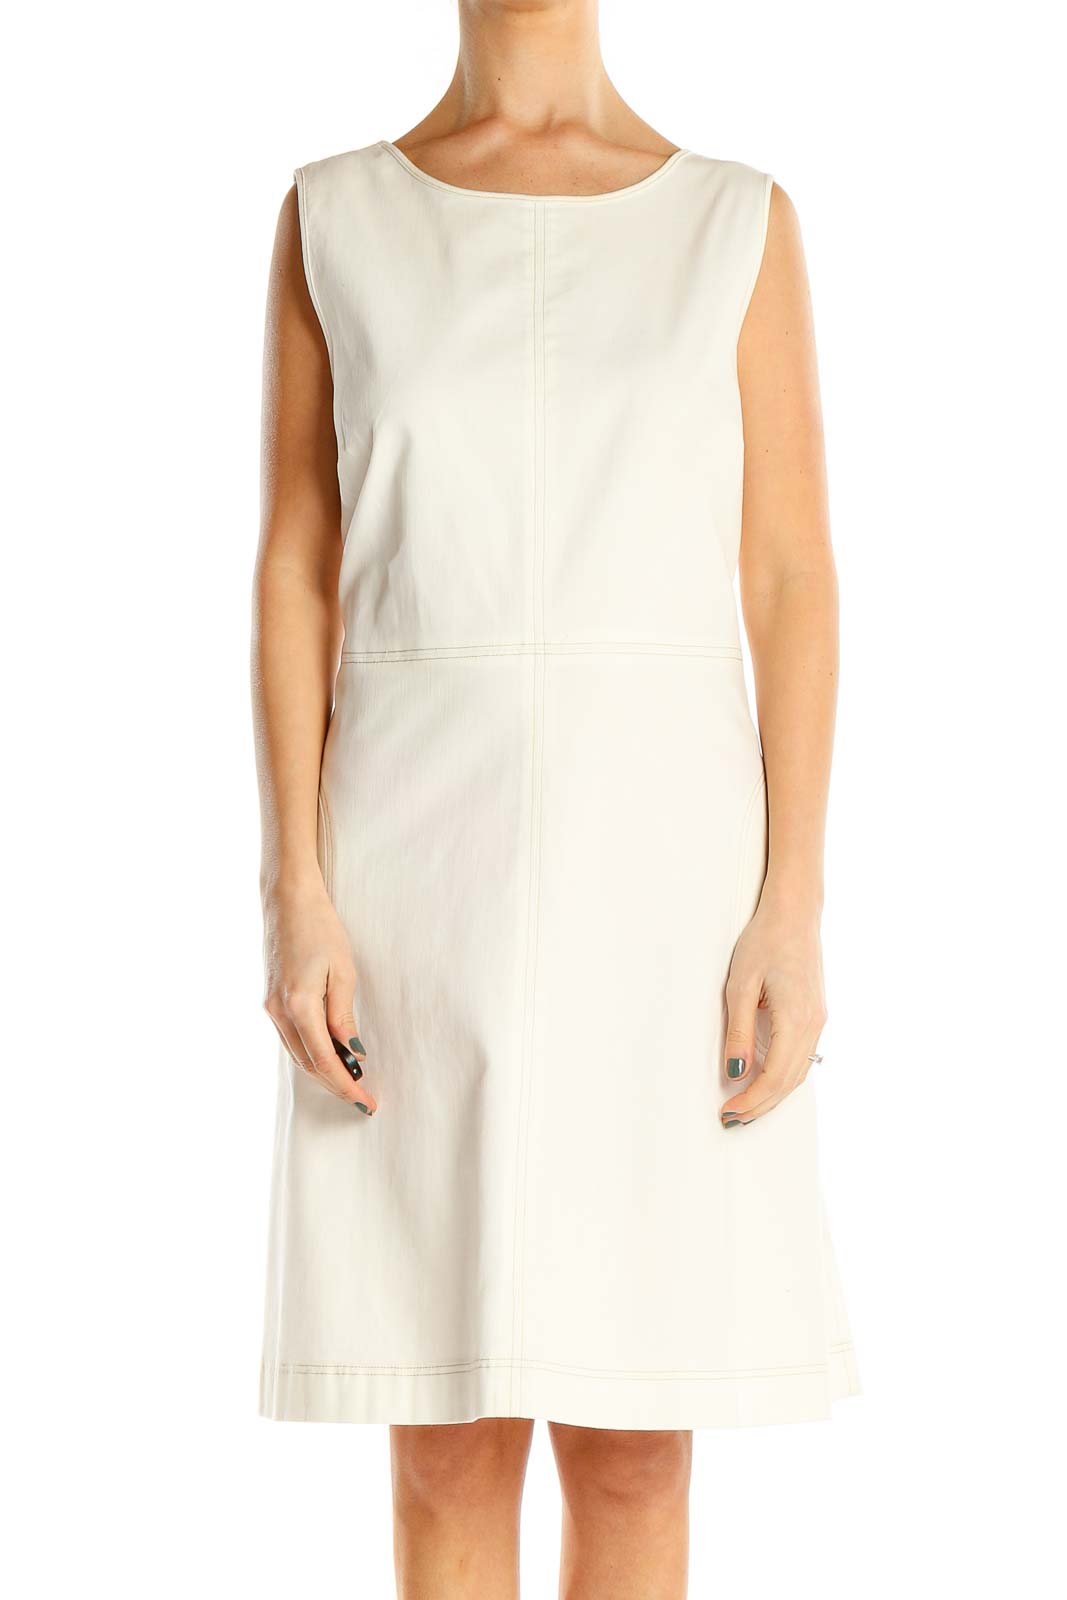 White Structured Classic A-Line Dress Front